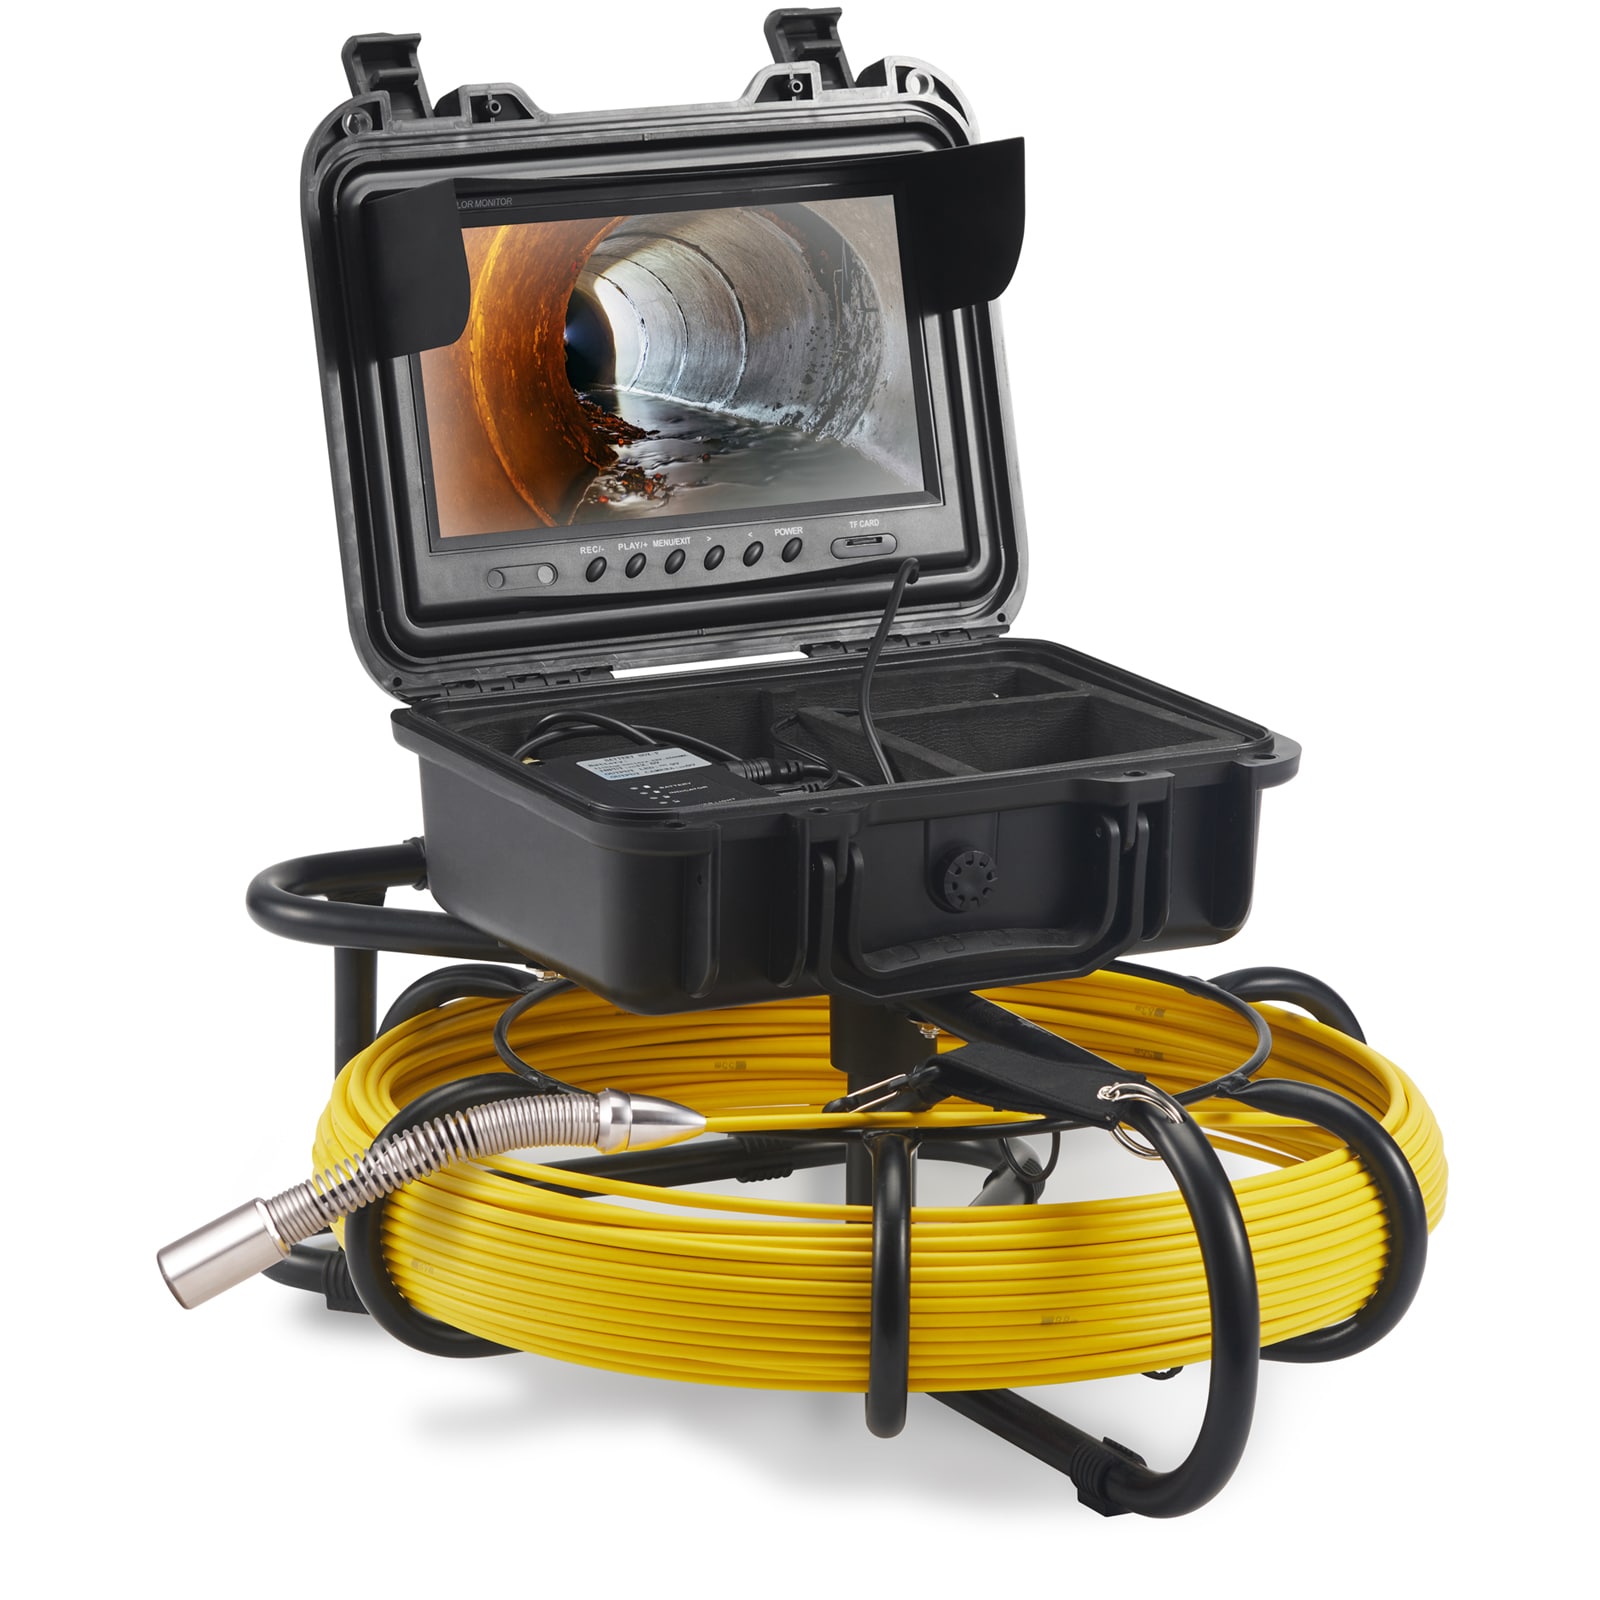 VEVOR Sewer Camera Pipe Inspection Camera 9-inch 720p Screen Pipe